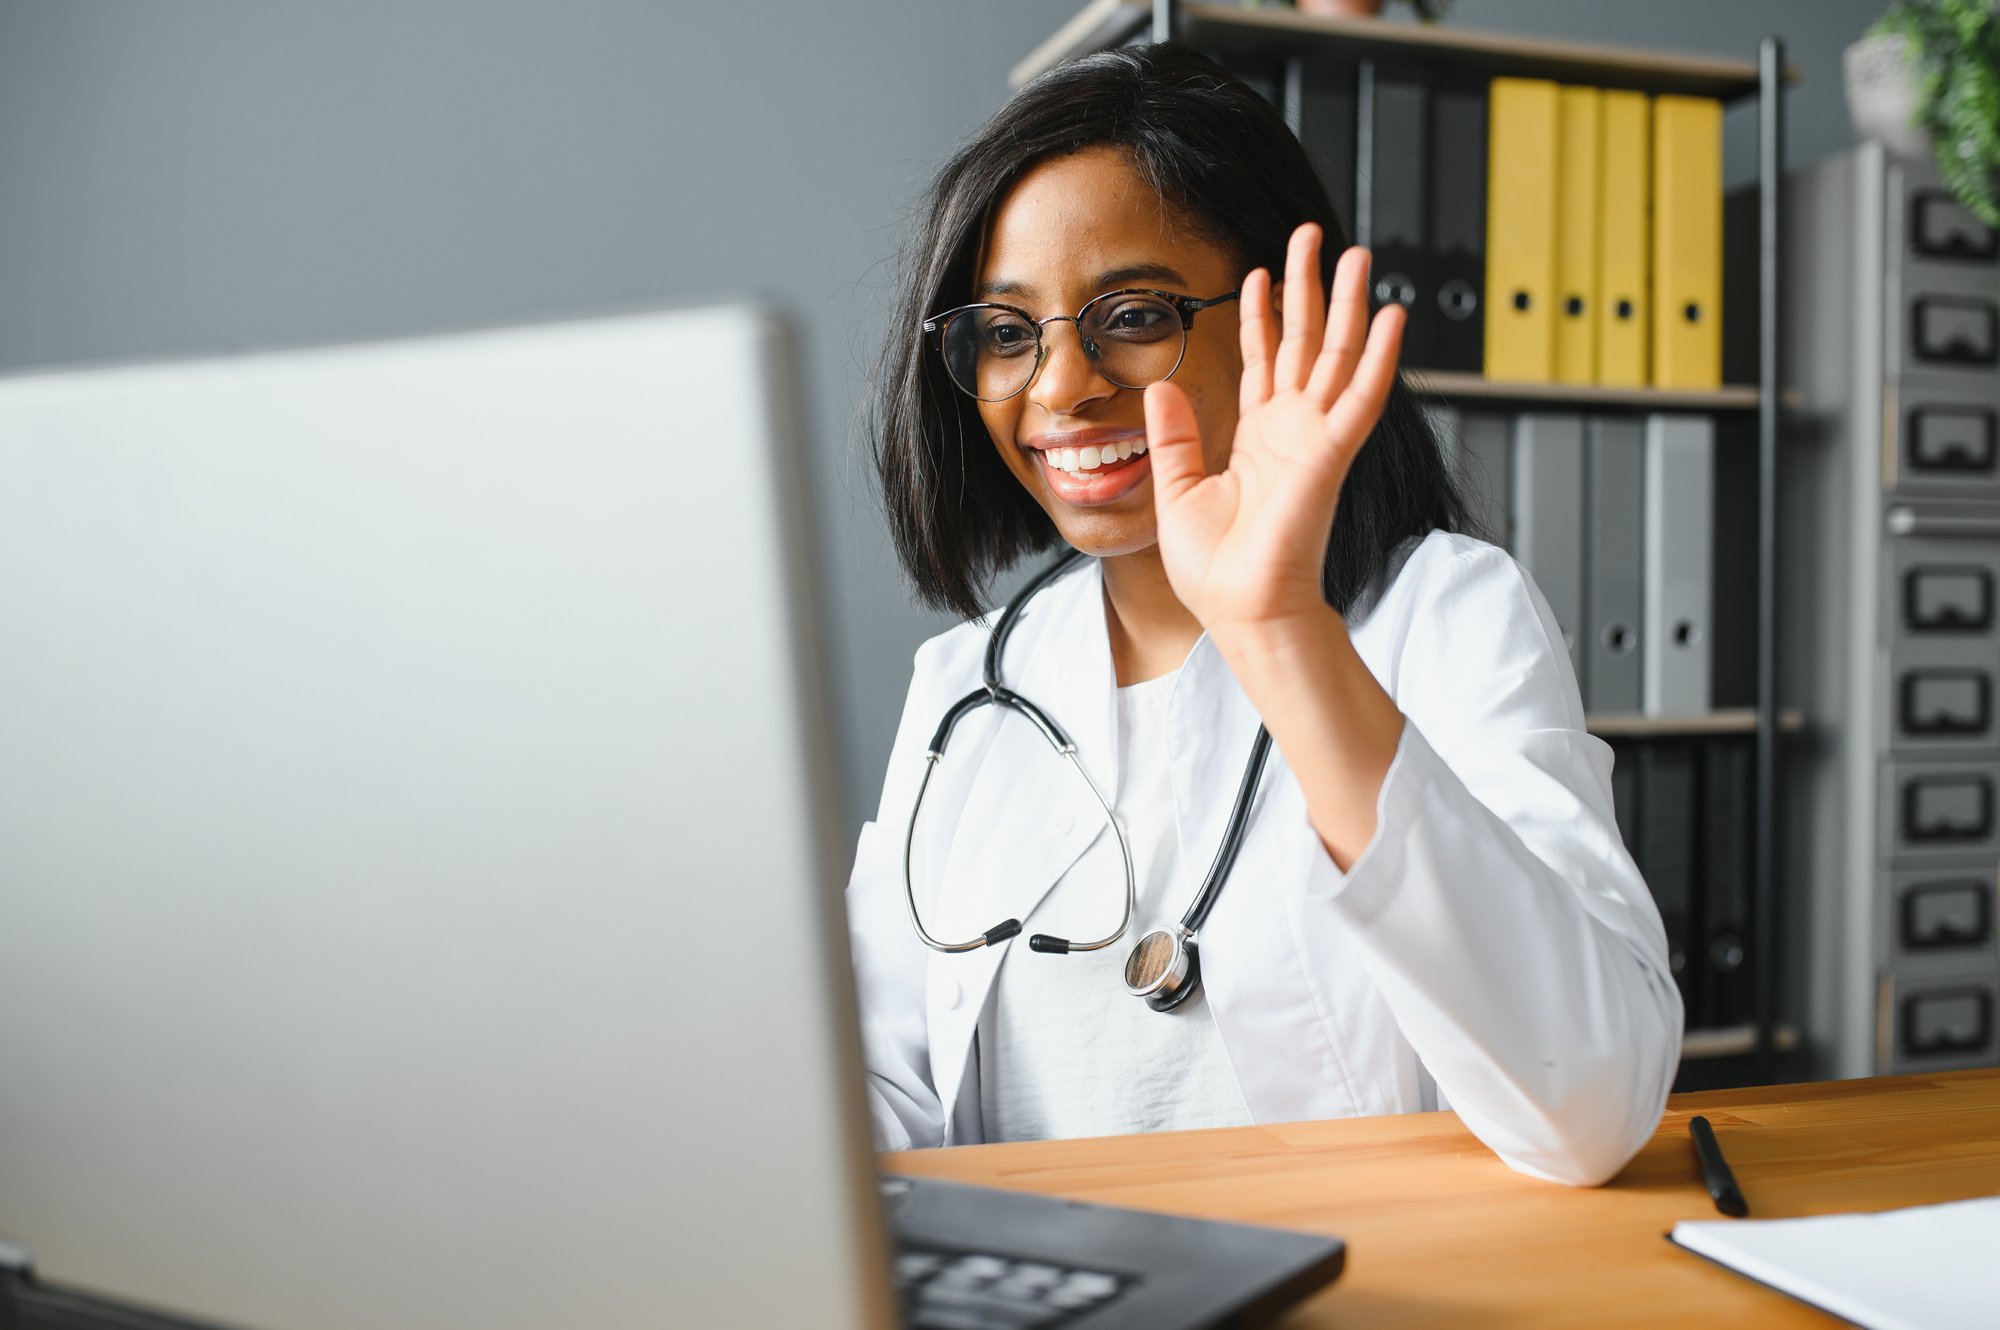 african-female-doctor-make-online-telemedicine-video-call-consult-patient-afro-american-black-woman-therapist-talking-camera-remote-videoconference-chat-webcam-view-face-headshot